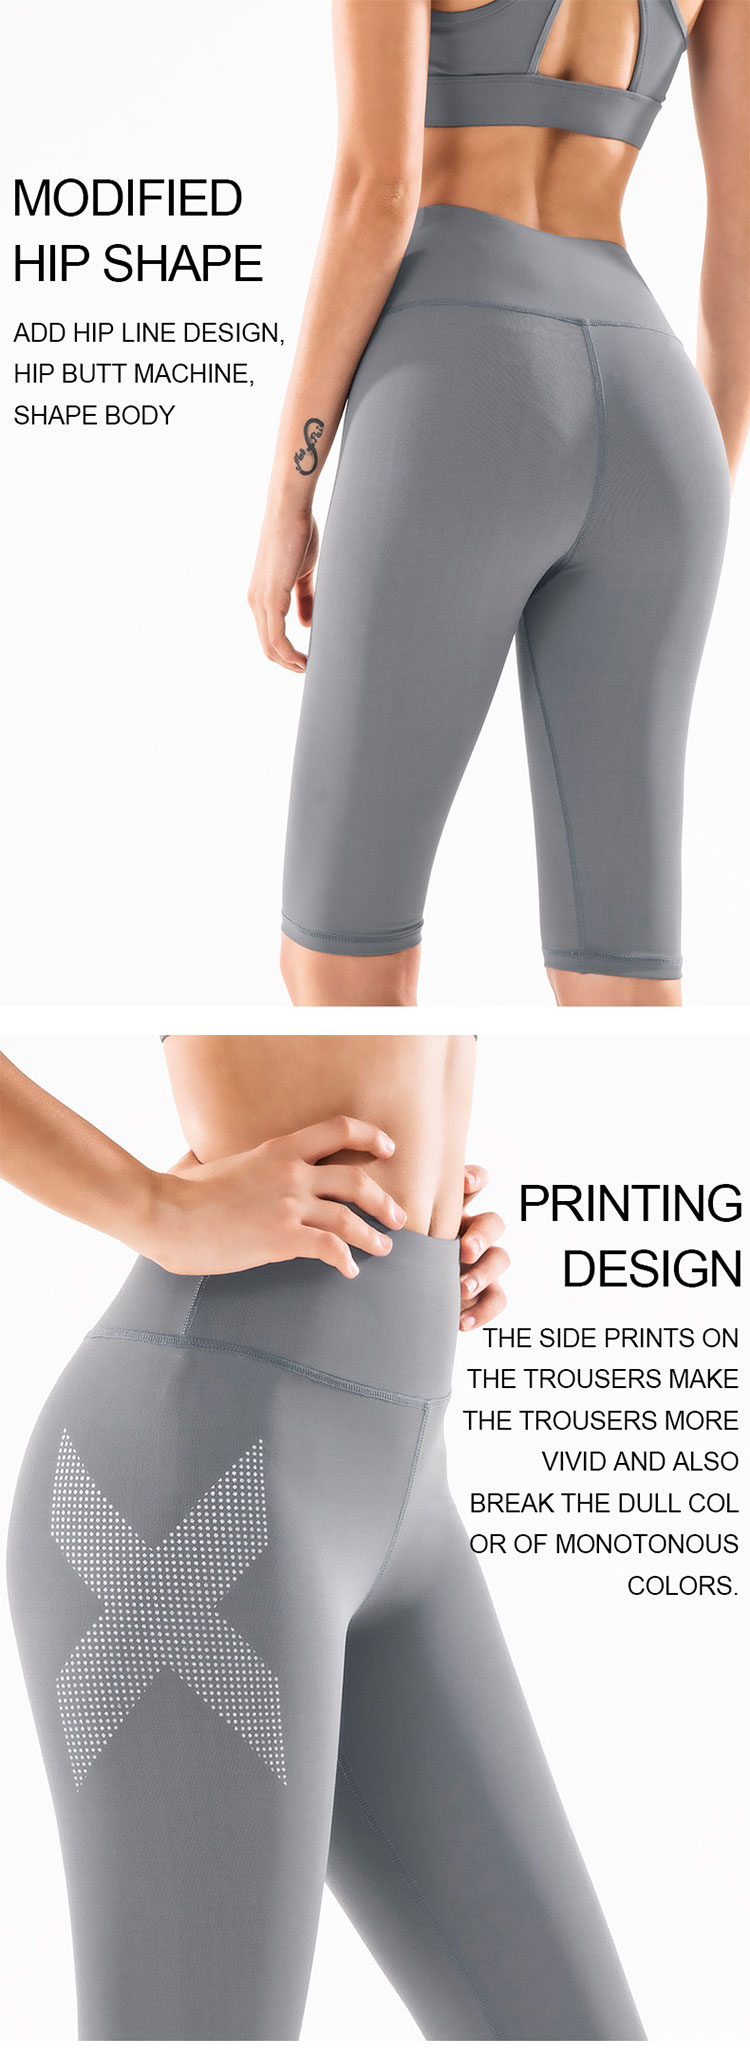 Non-slip-elastic-high-waist-design-safe-for-fitness-training-package-does-not-drop